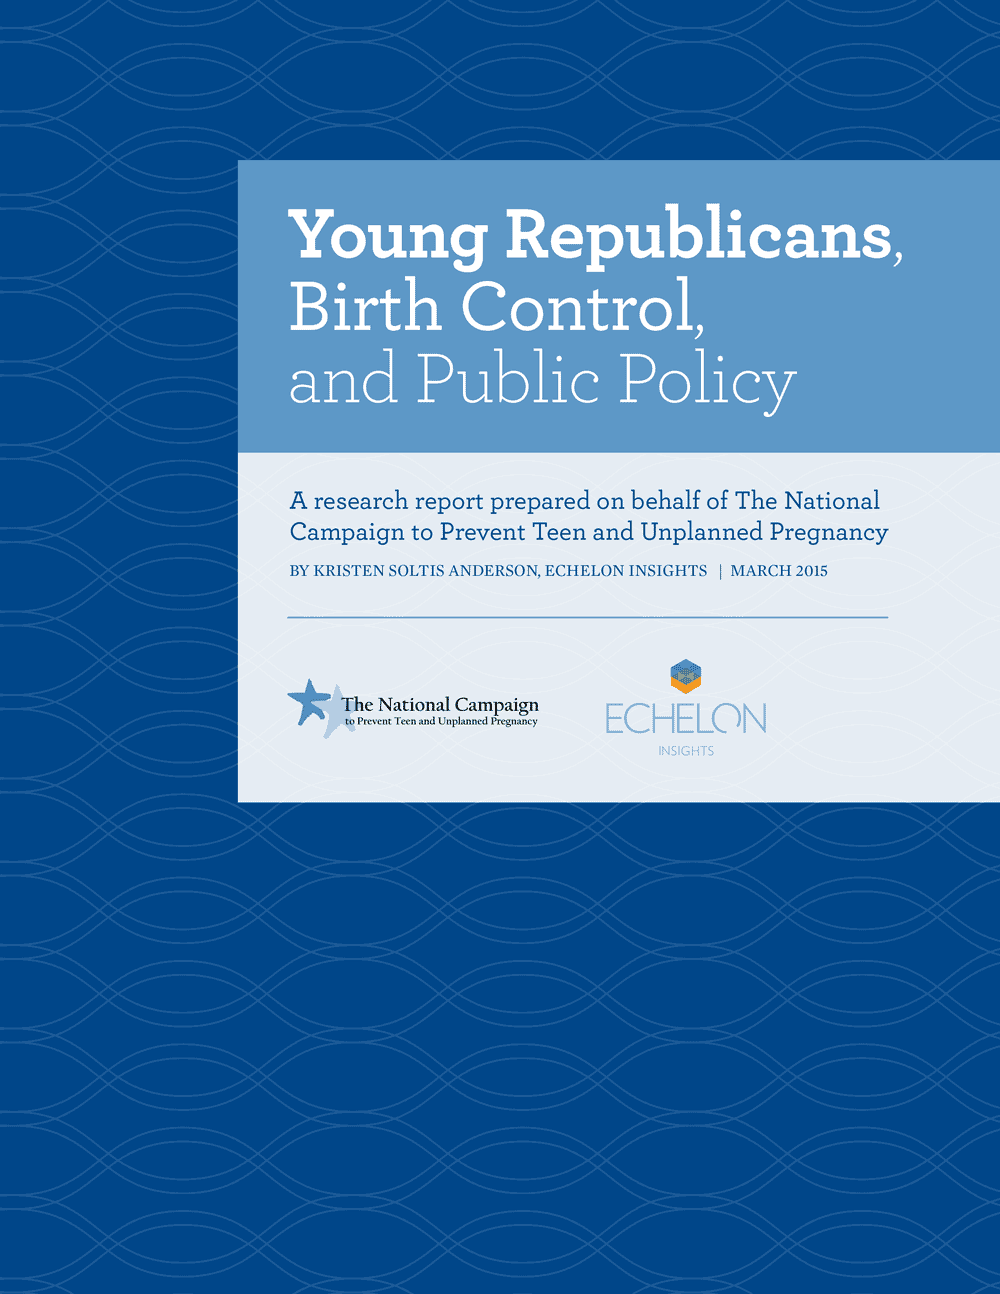 Young Republicans, Birth Control, and Public Policy